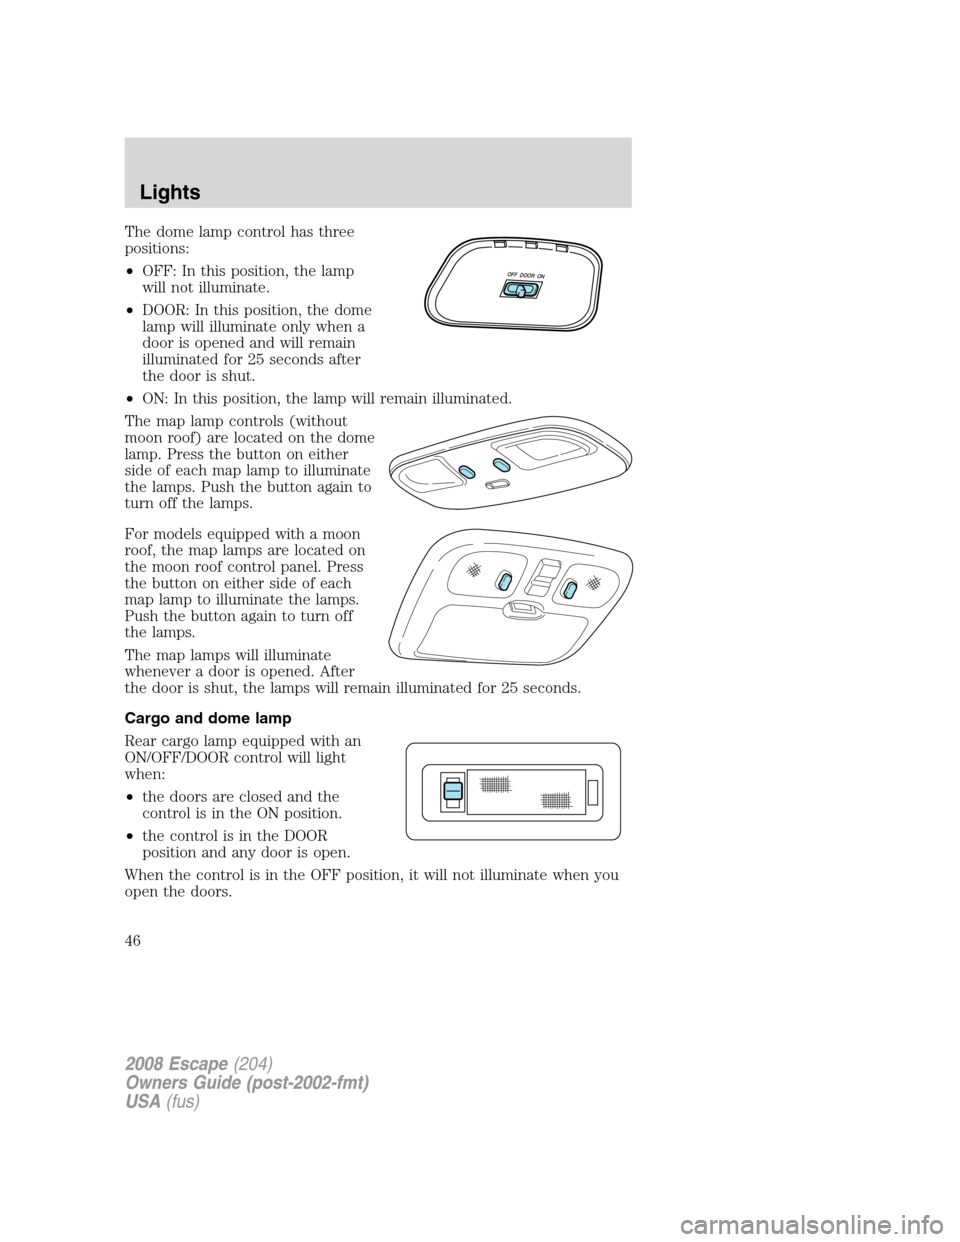 FORD ESCAPE 2008 2.G Owners Manual The dome lamp control has three
positions:
•OFF: In this position, the lamp
will not illuminate.
•DOOR: In this position, the dome
lamp will illuminate only when a
door is opened and will remain
i